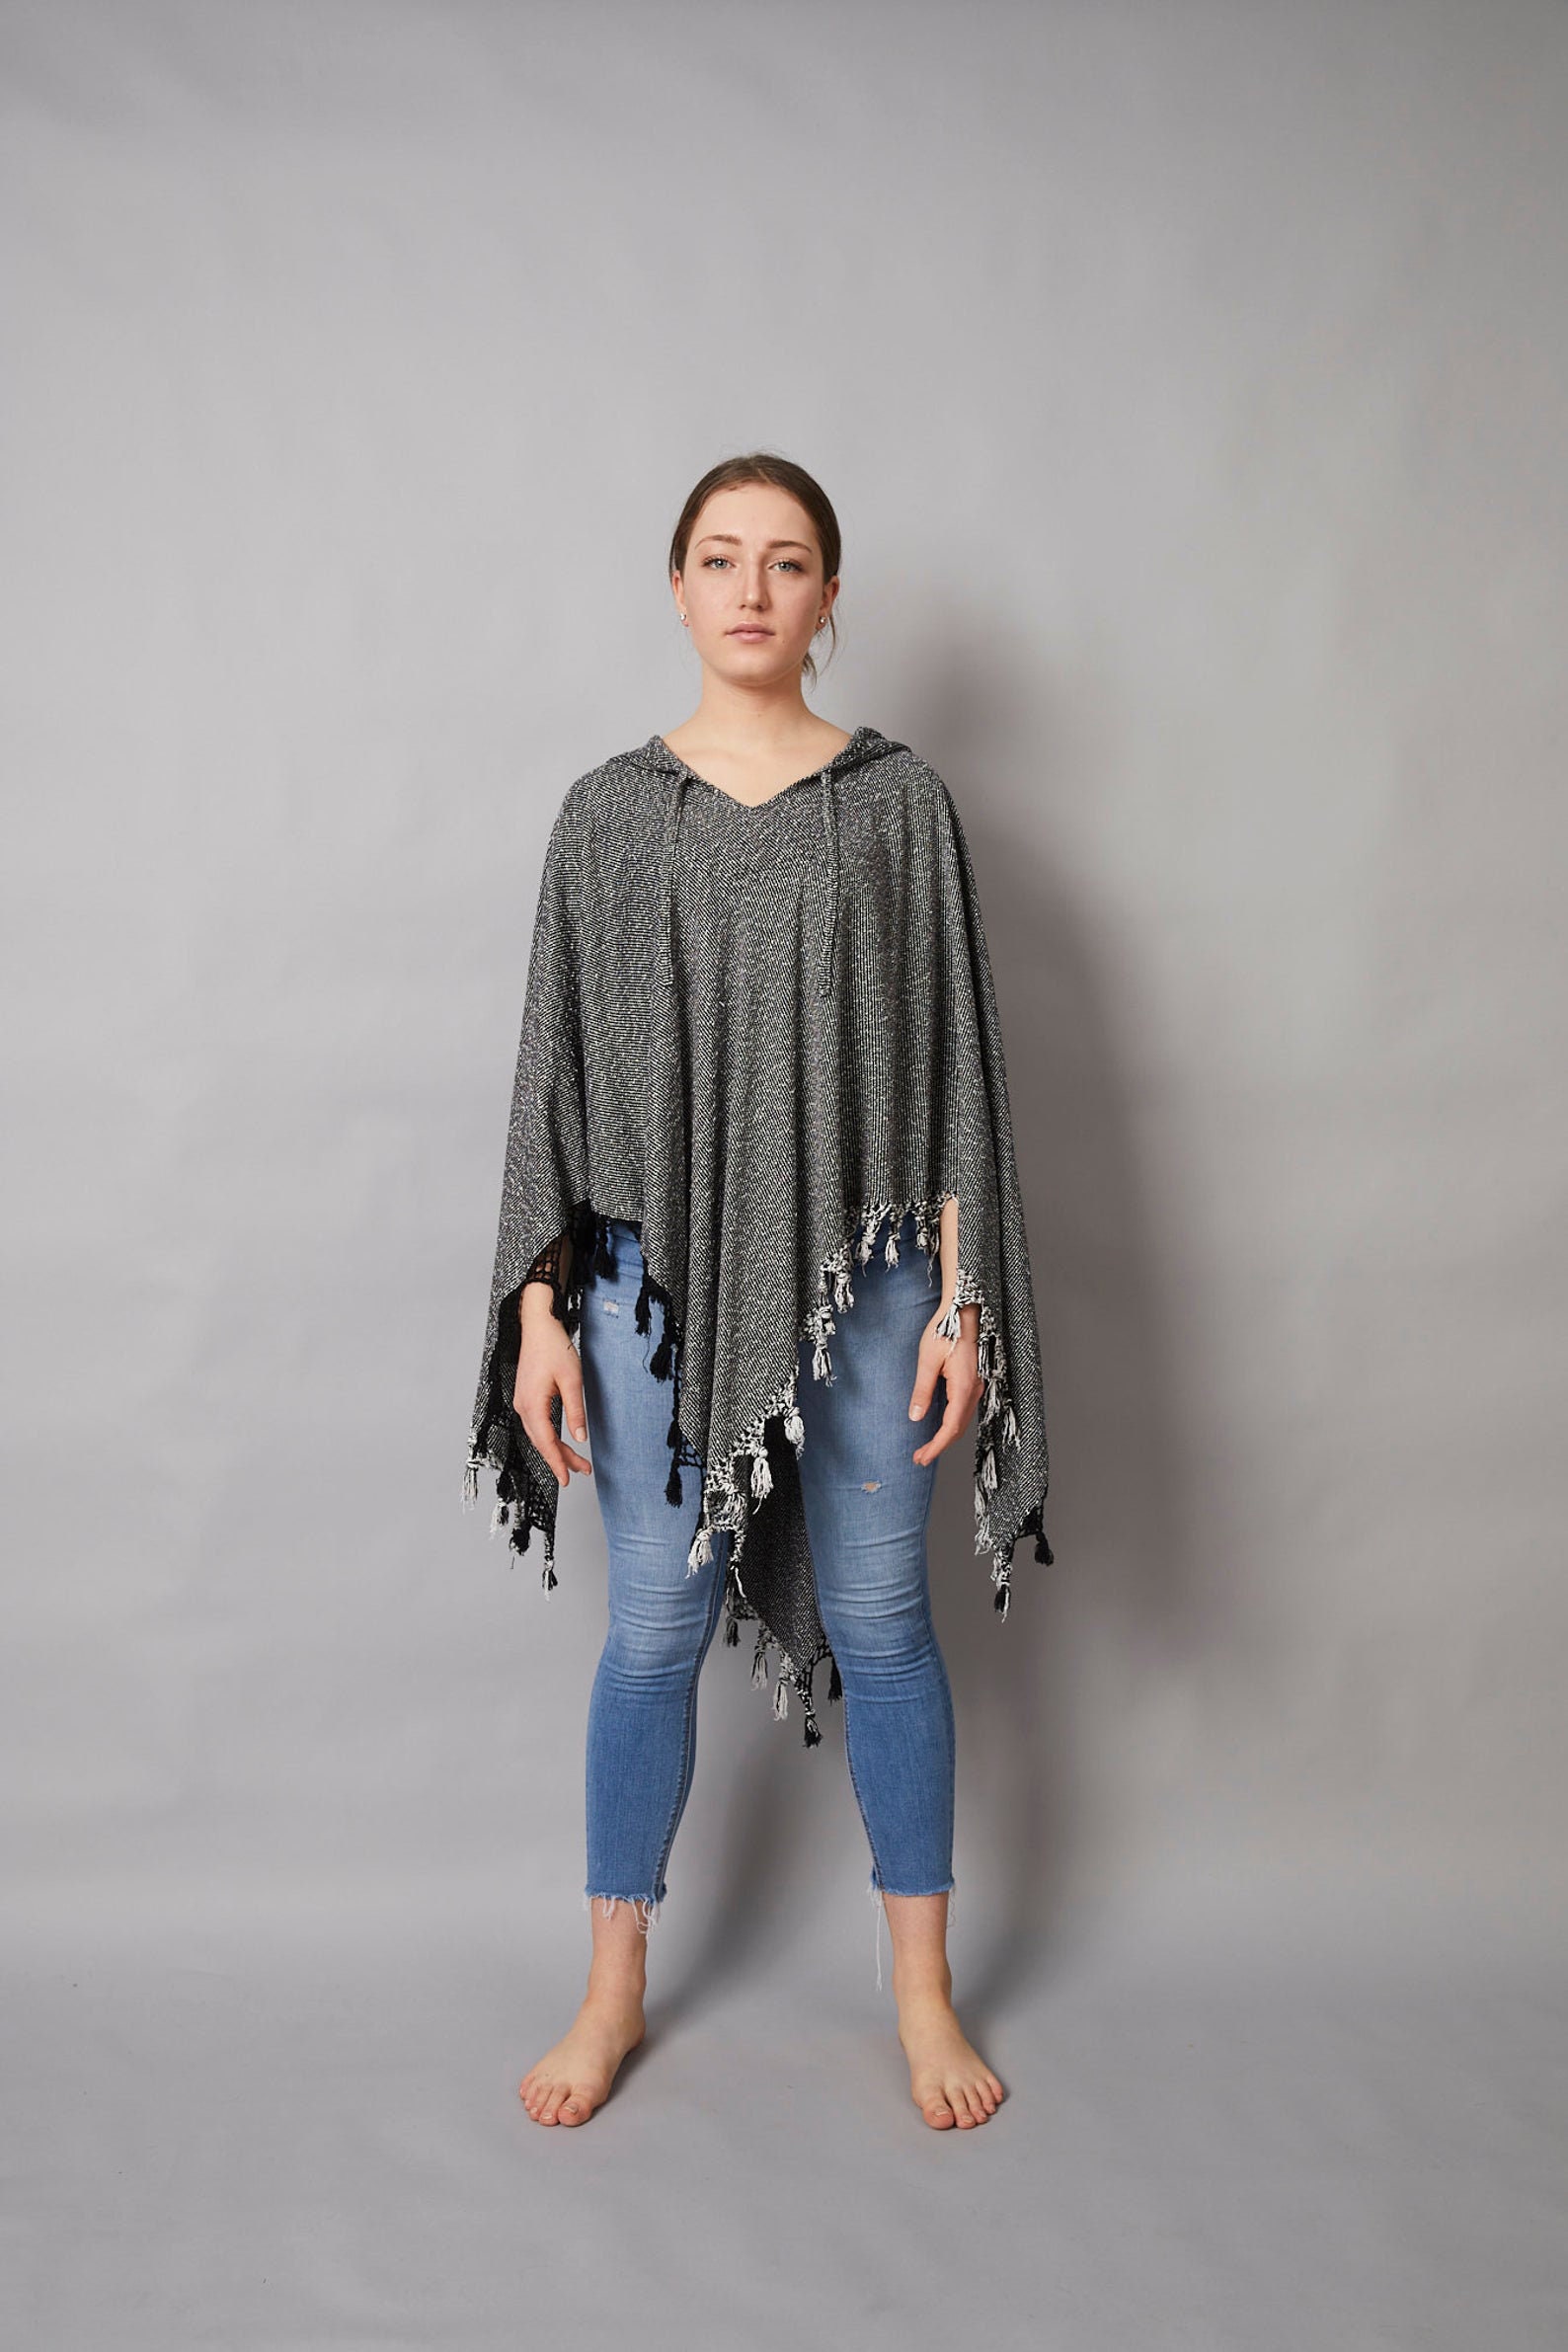 Academie stoeprand dump Buy Charcoal Moroccan Kaftan Poncho With Handwoven Tassels Online in India  - Etsy